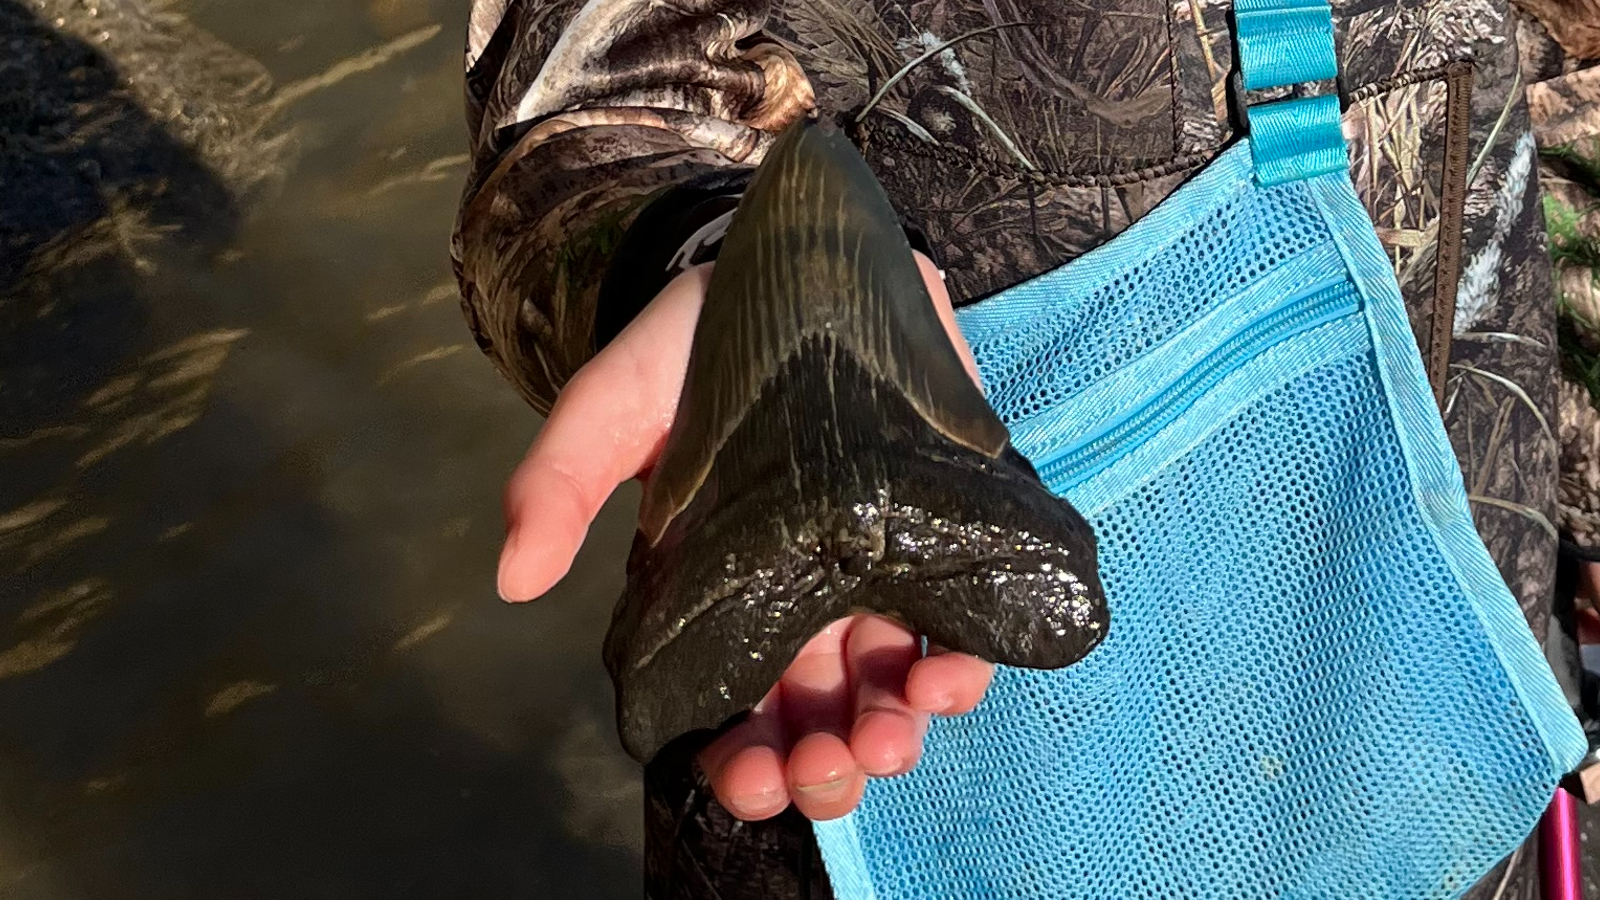 Massive megalodon tooth discovered in Chesapeake Bay by 9-year-old fossil hunter thumbnail